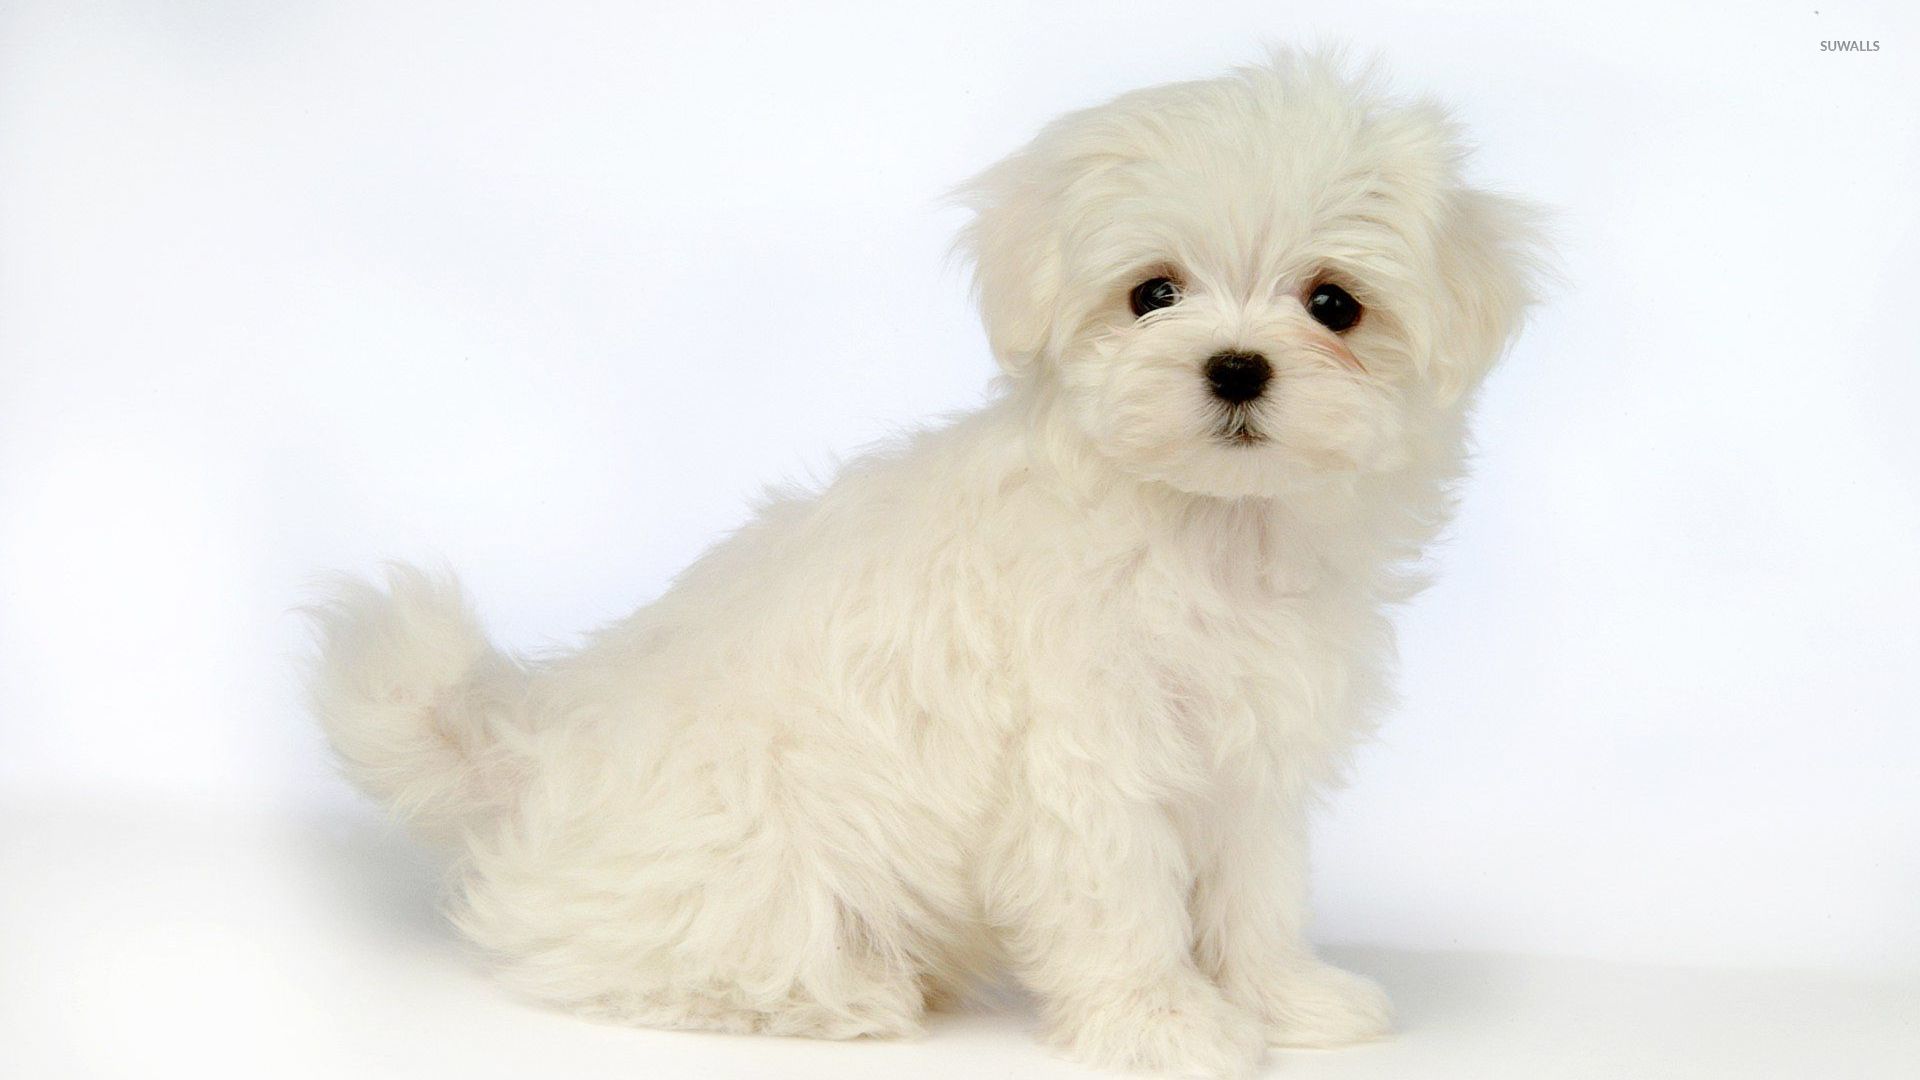 Cute white puppy [2] wallpaper - Animal wallpapers - #47625